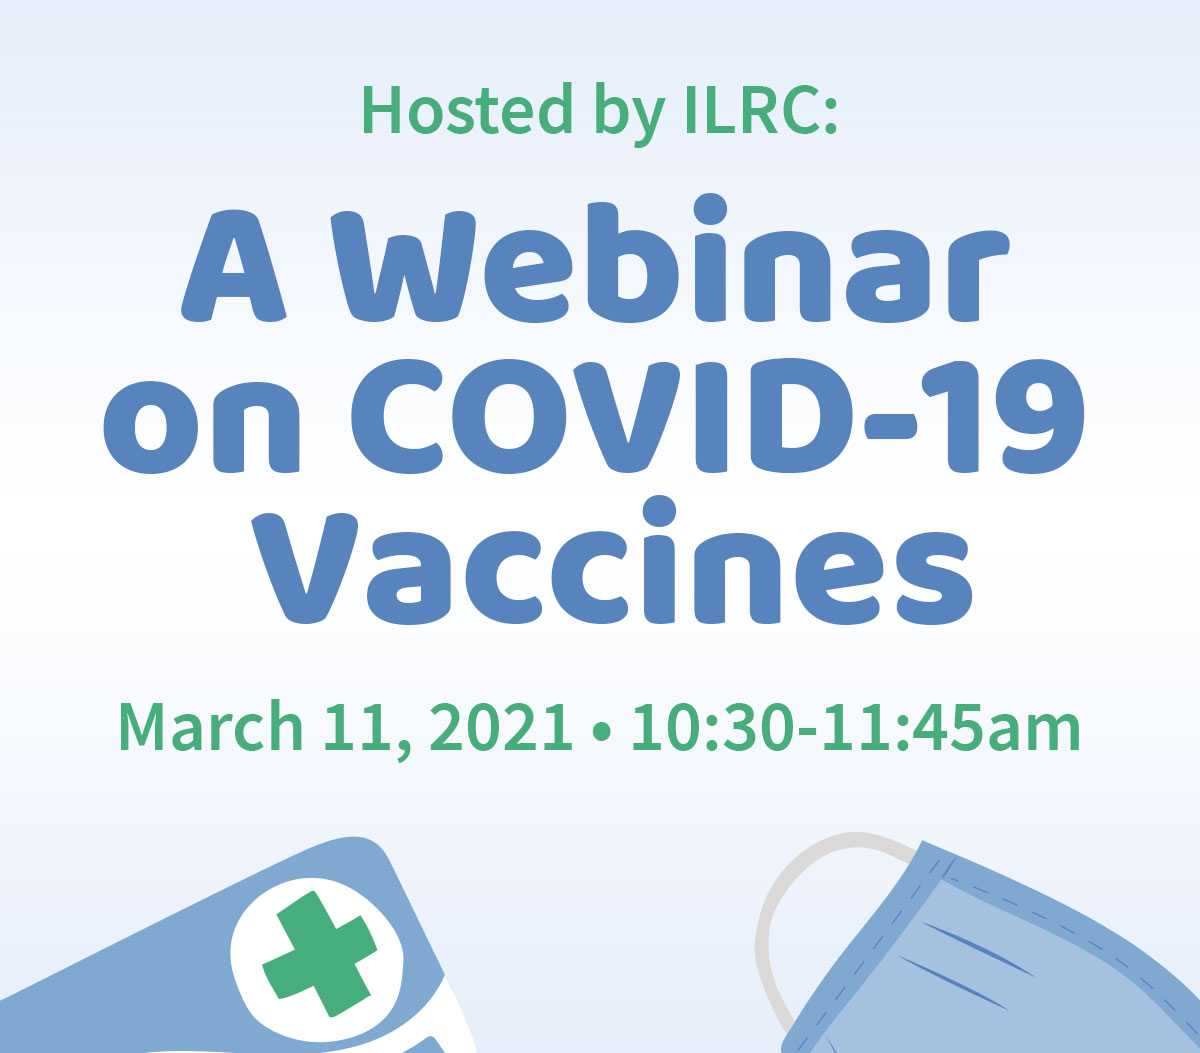 Hosted by ILRC: A Webinar on COVID-19 Vaccines. March 11, 2021 from 10:30 to 11:45am.